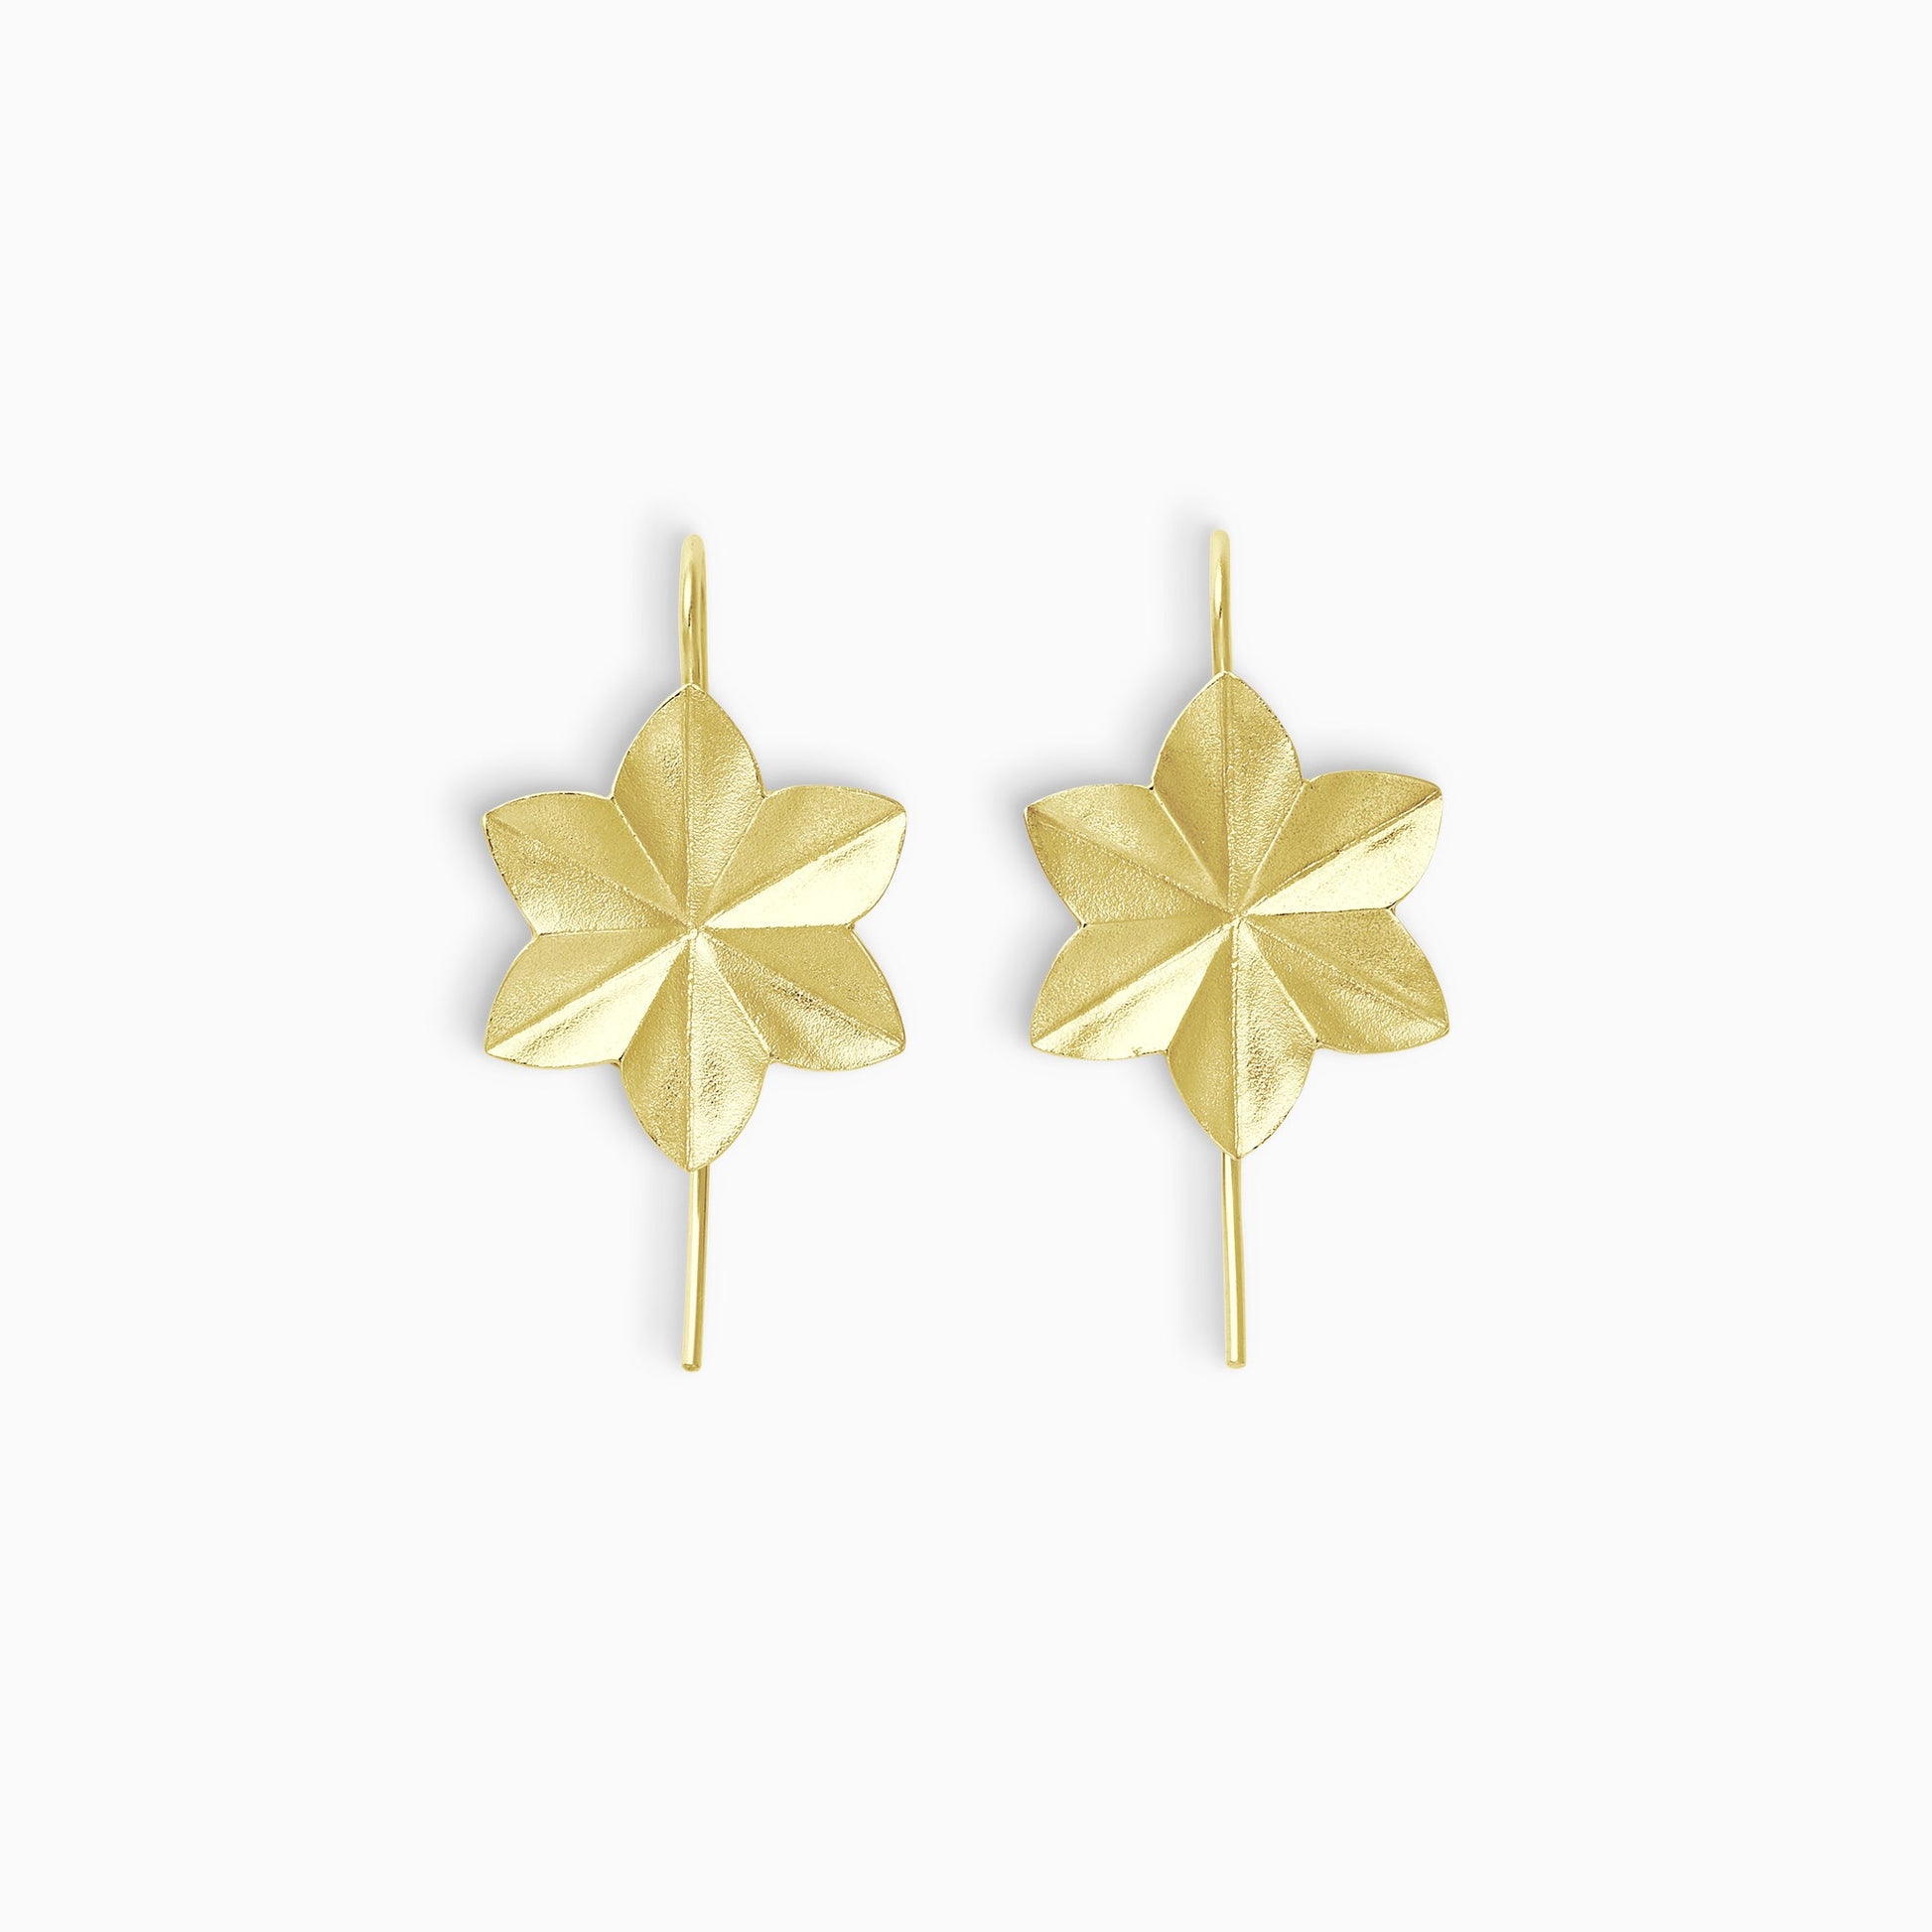 A pair of 18ct Fairtrade yellow gold lightly textured earrings in the shape of an origami folded 6 petal flower with a hook fastening. 38mm length, 18mm width.